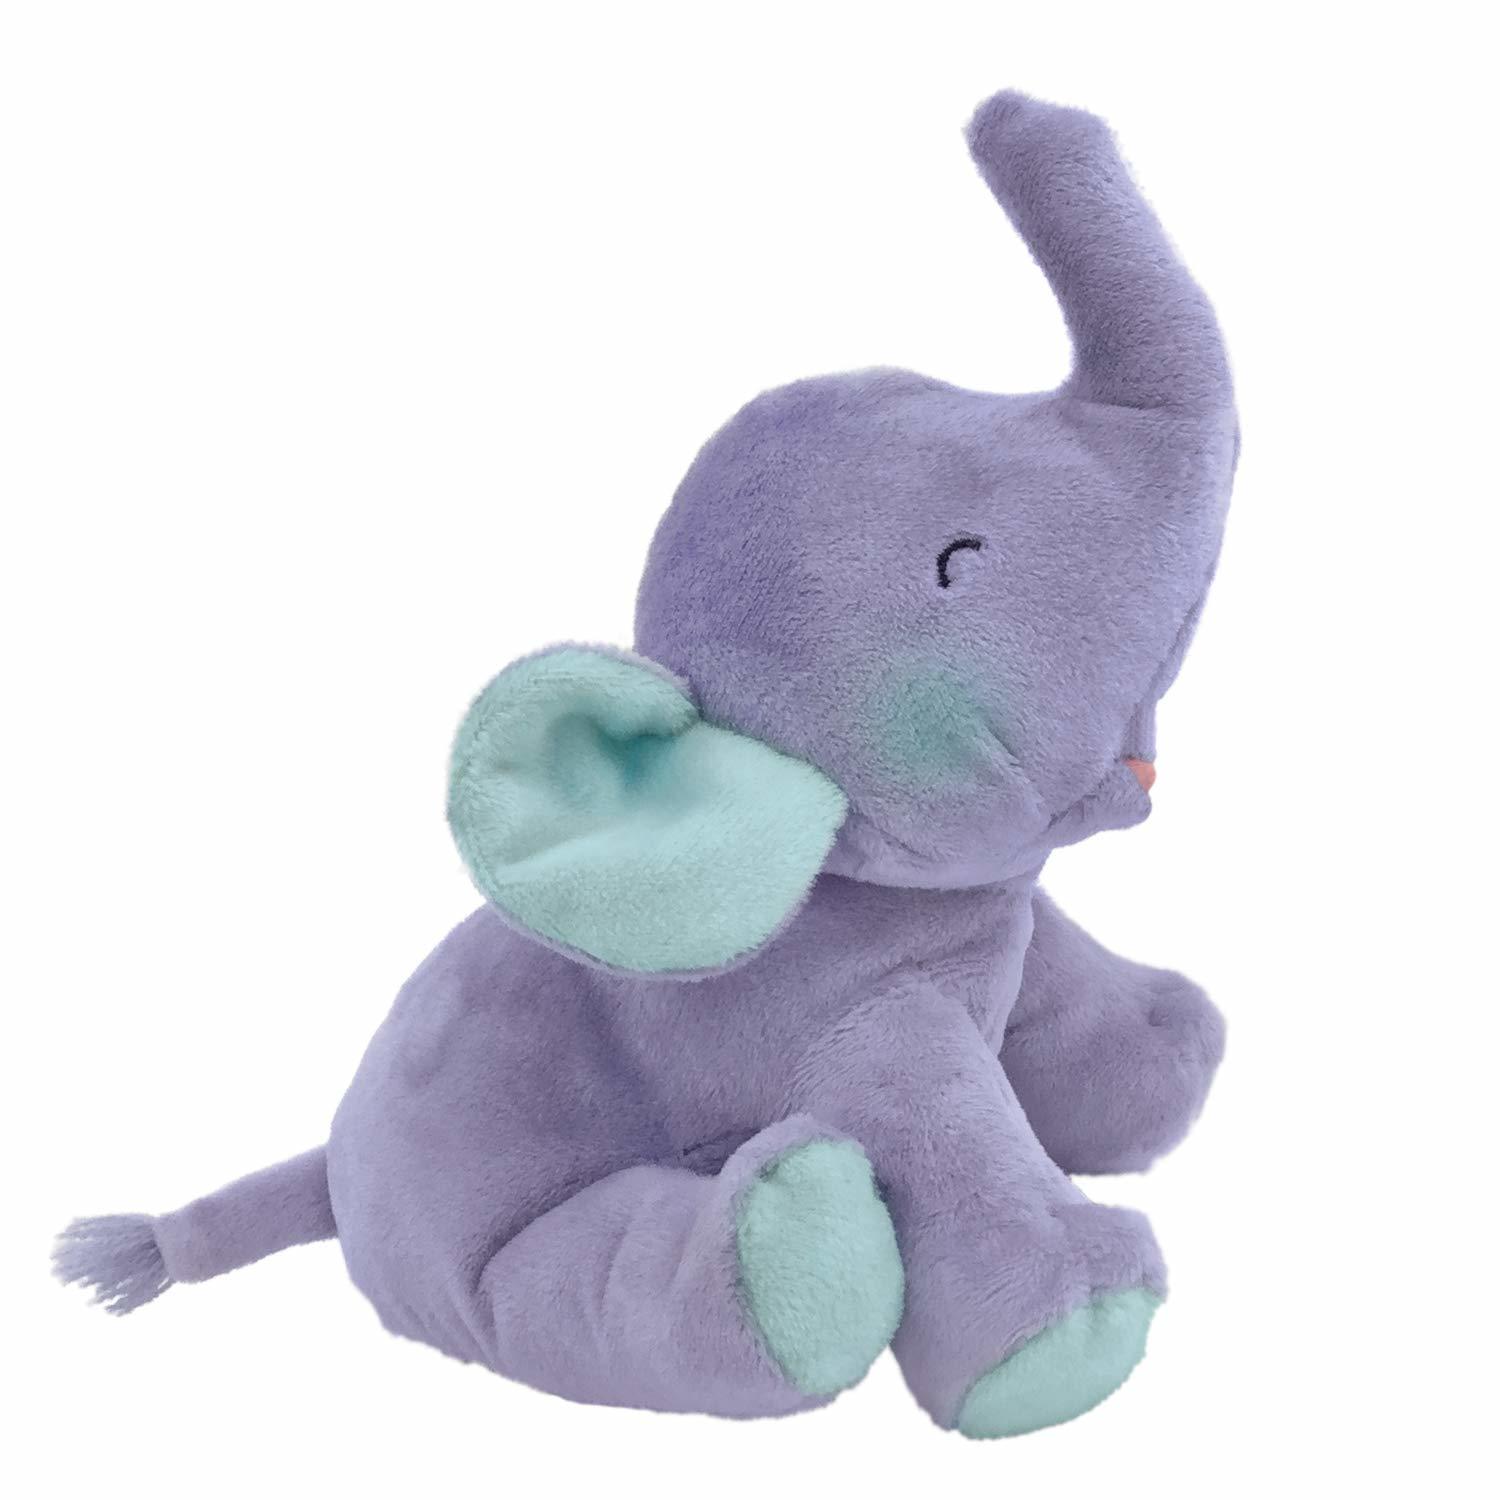 Primary image for MerryMakers If Animals Kissed Good Night Soft Plush Baby Elephant Stuffed Animal